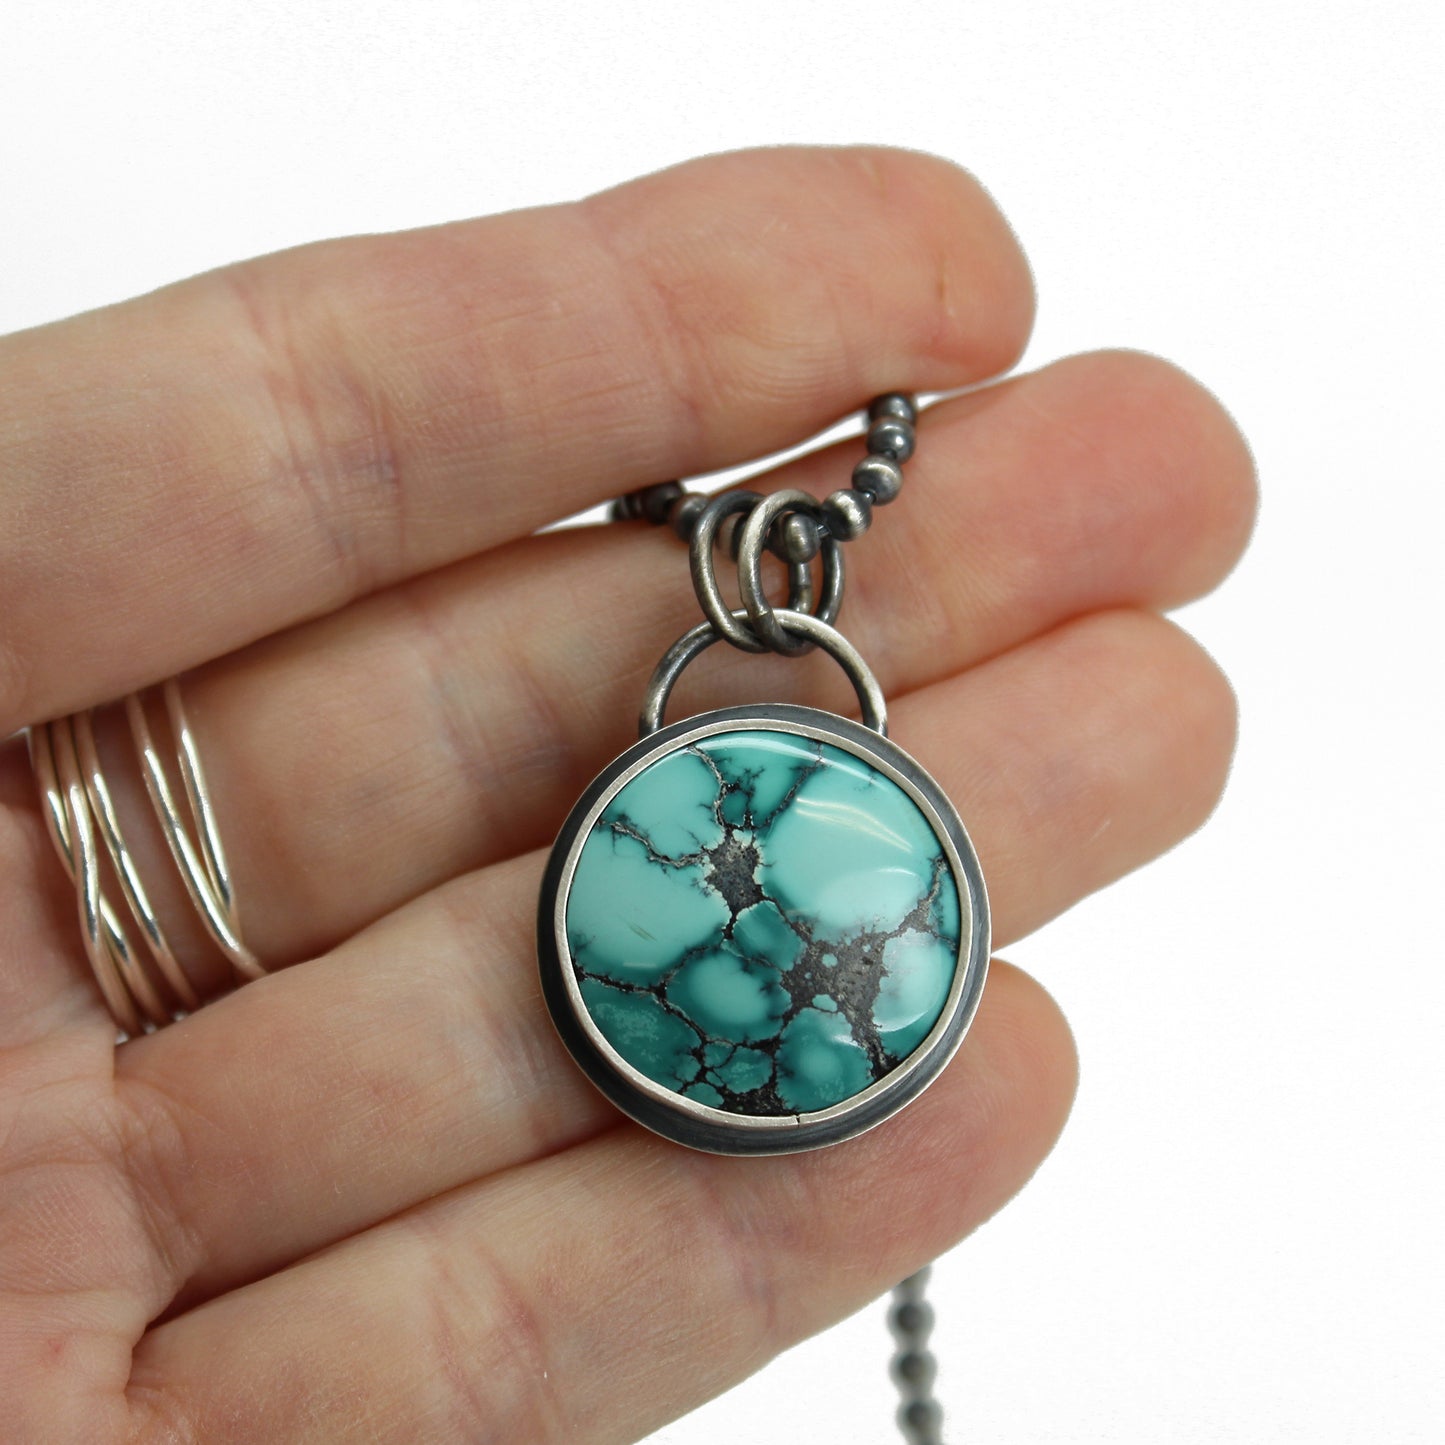 Yungai Turquoise Pendant Necklace in Sterling Silver